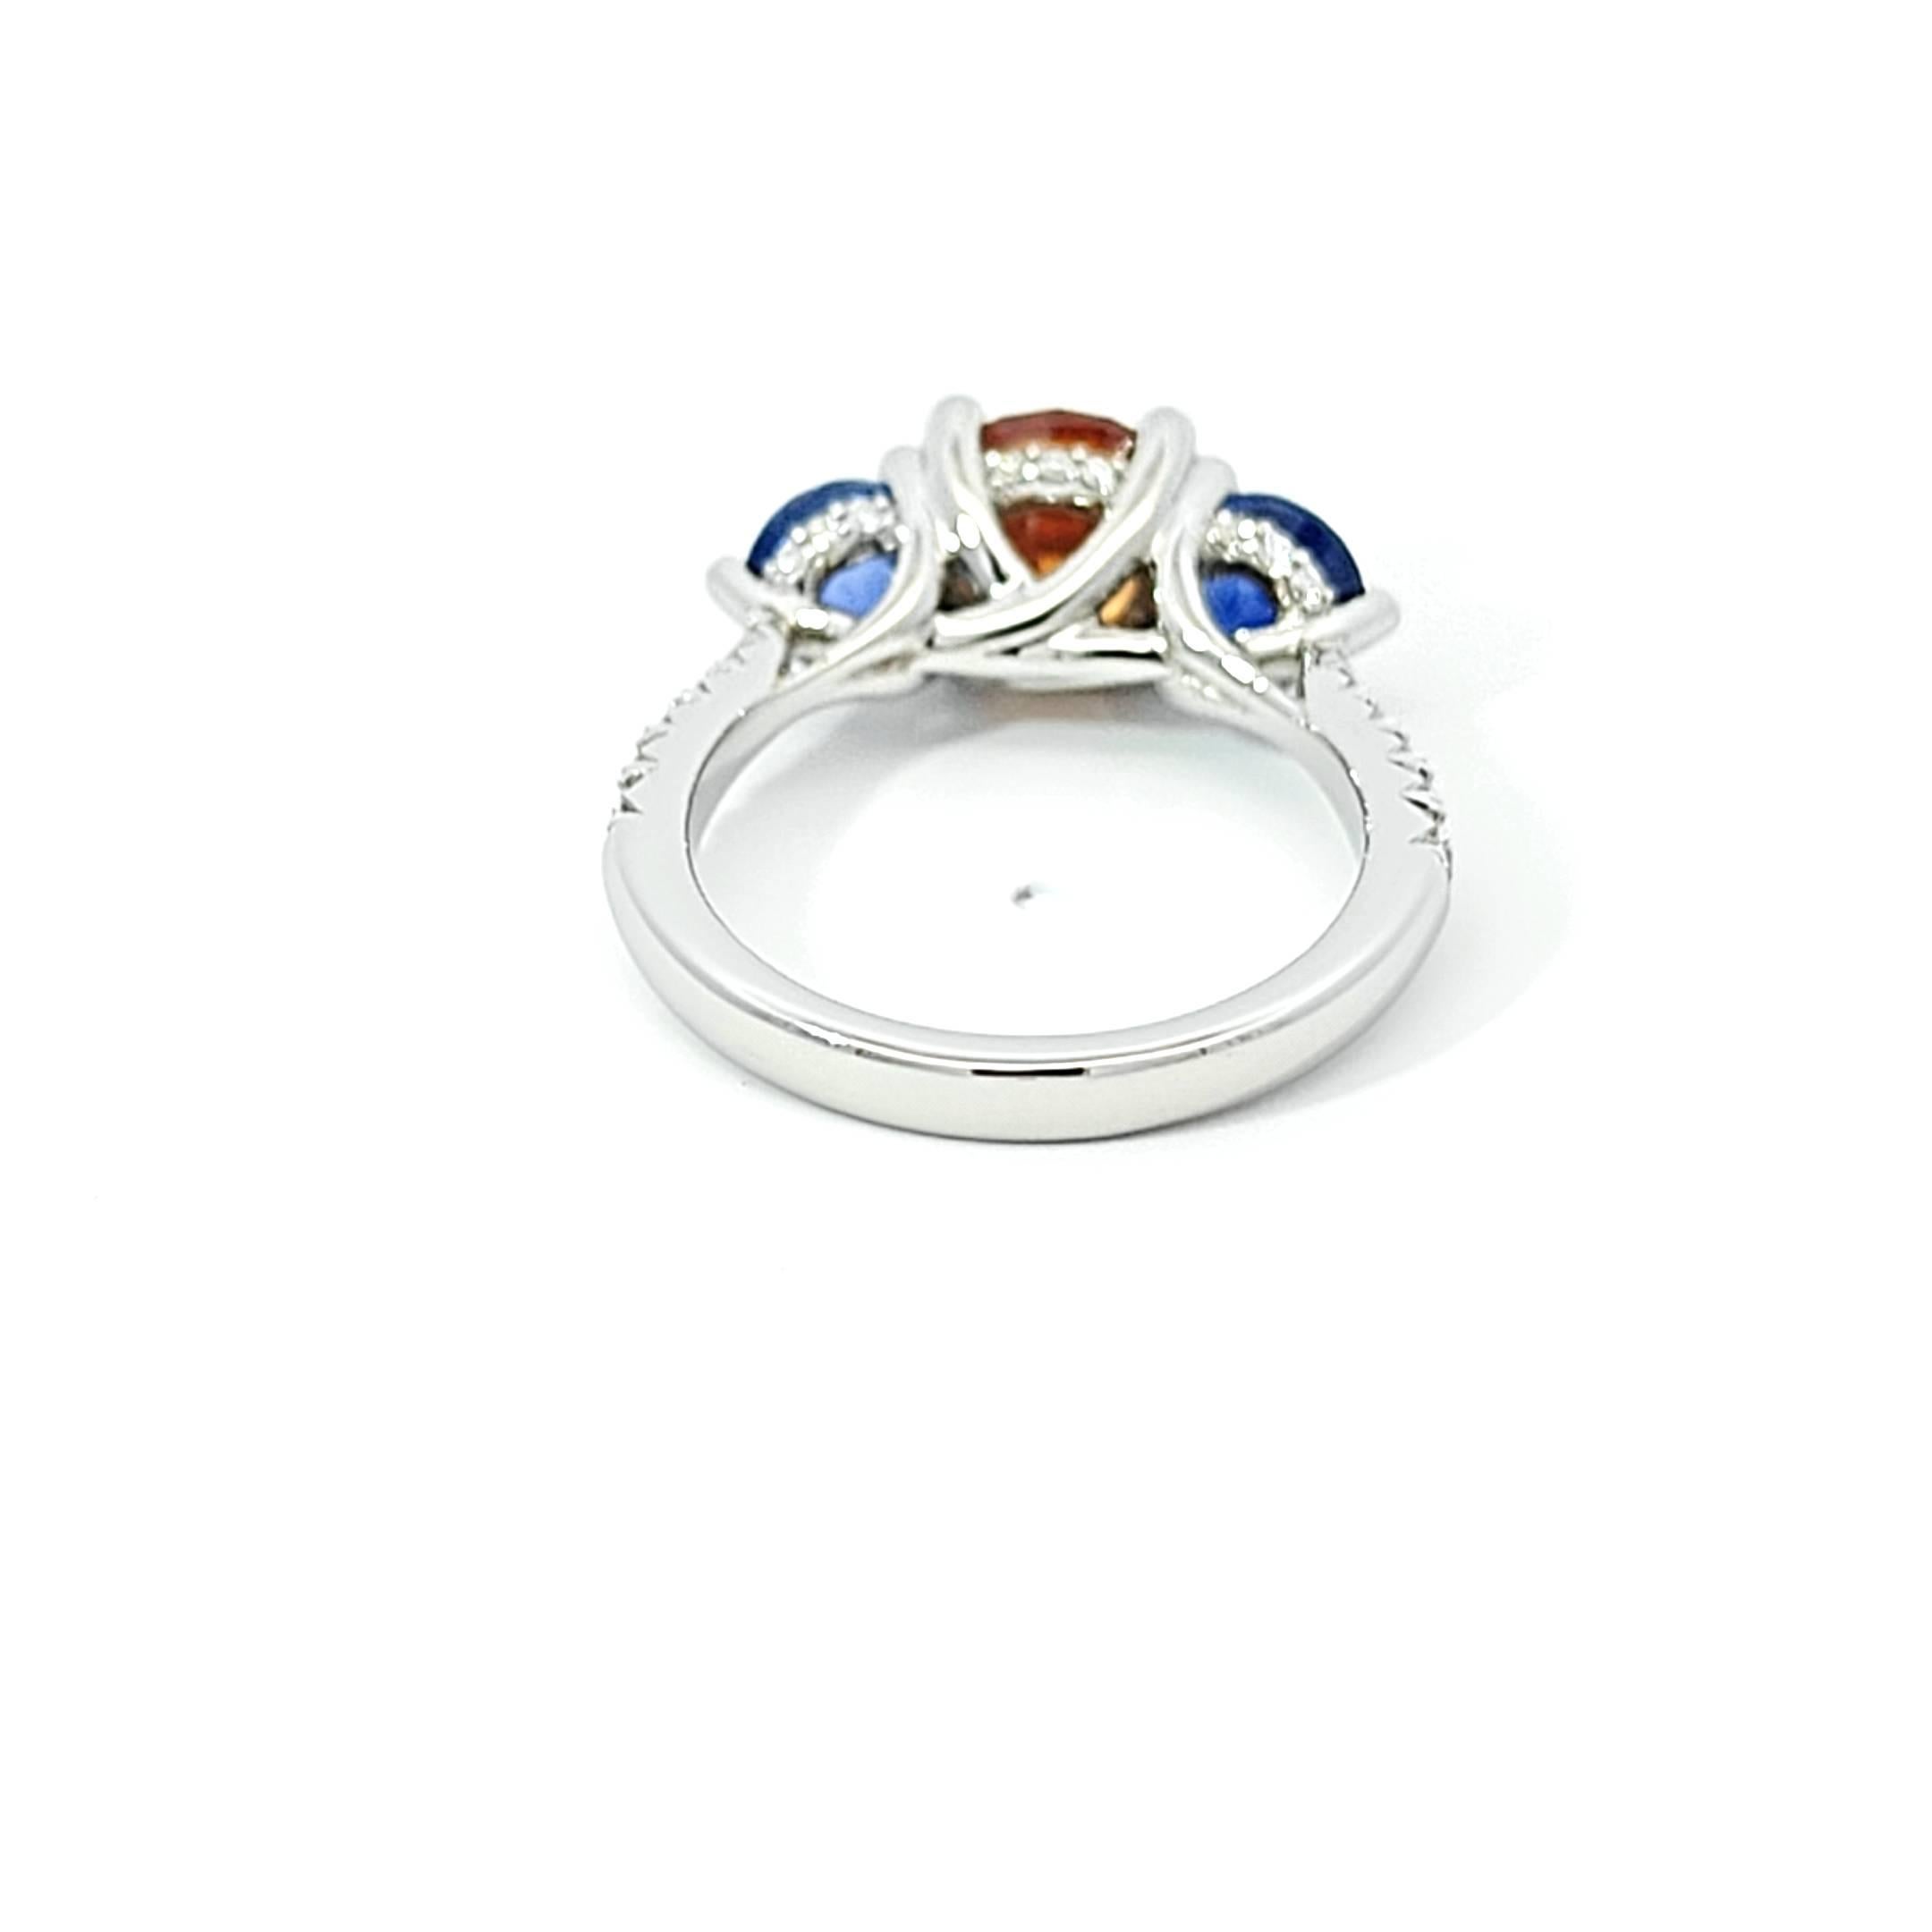 Round Cut PT950 Ring with Natural White Diamonds, Natural Orange Zircon and Two Sapphires